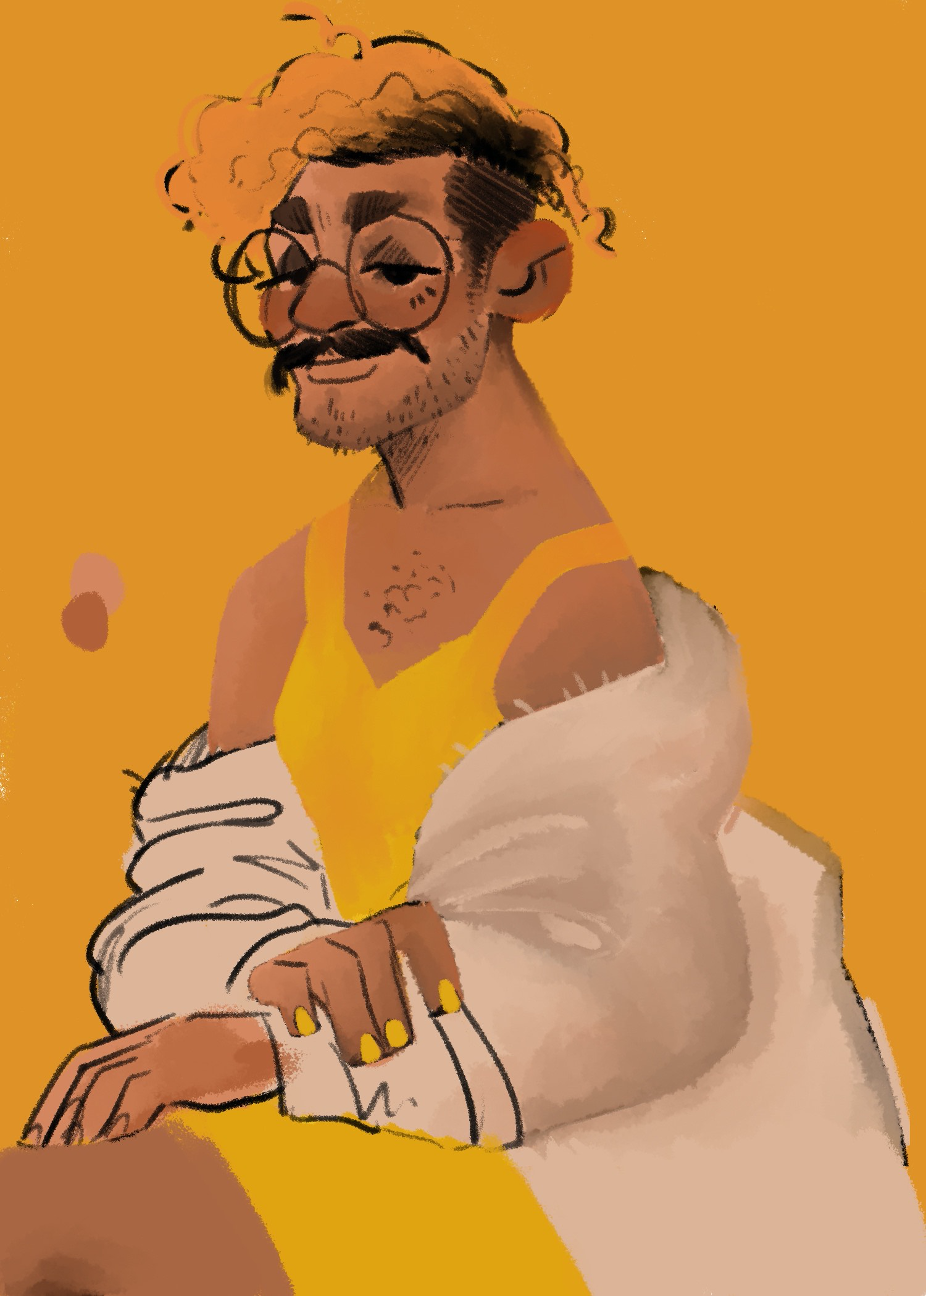 Self portrait of Julio Guity with a shirt draped around his arms, yellow hair, a yellow dress, and yellow background.